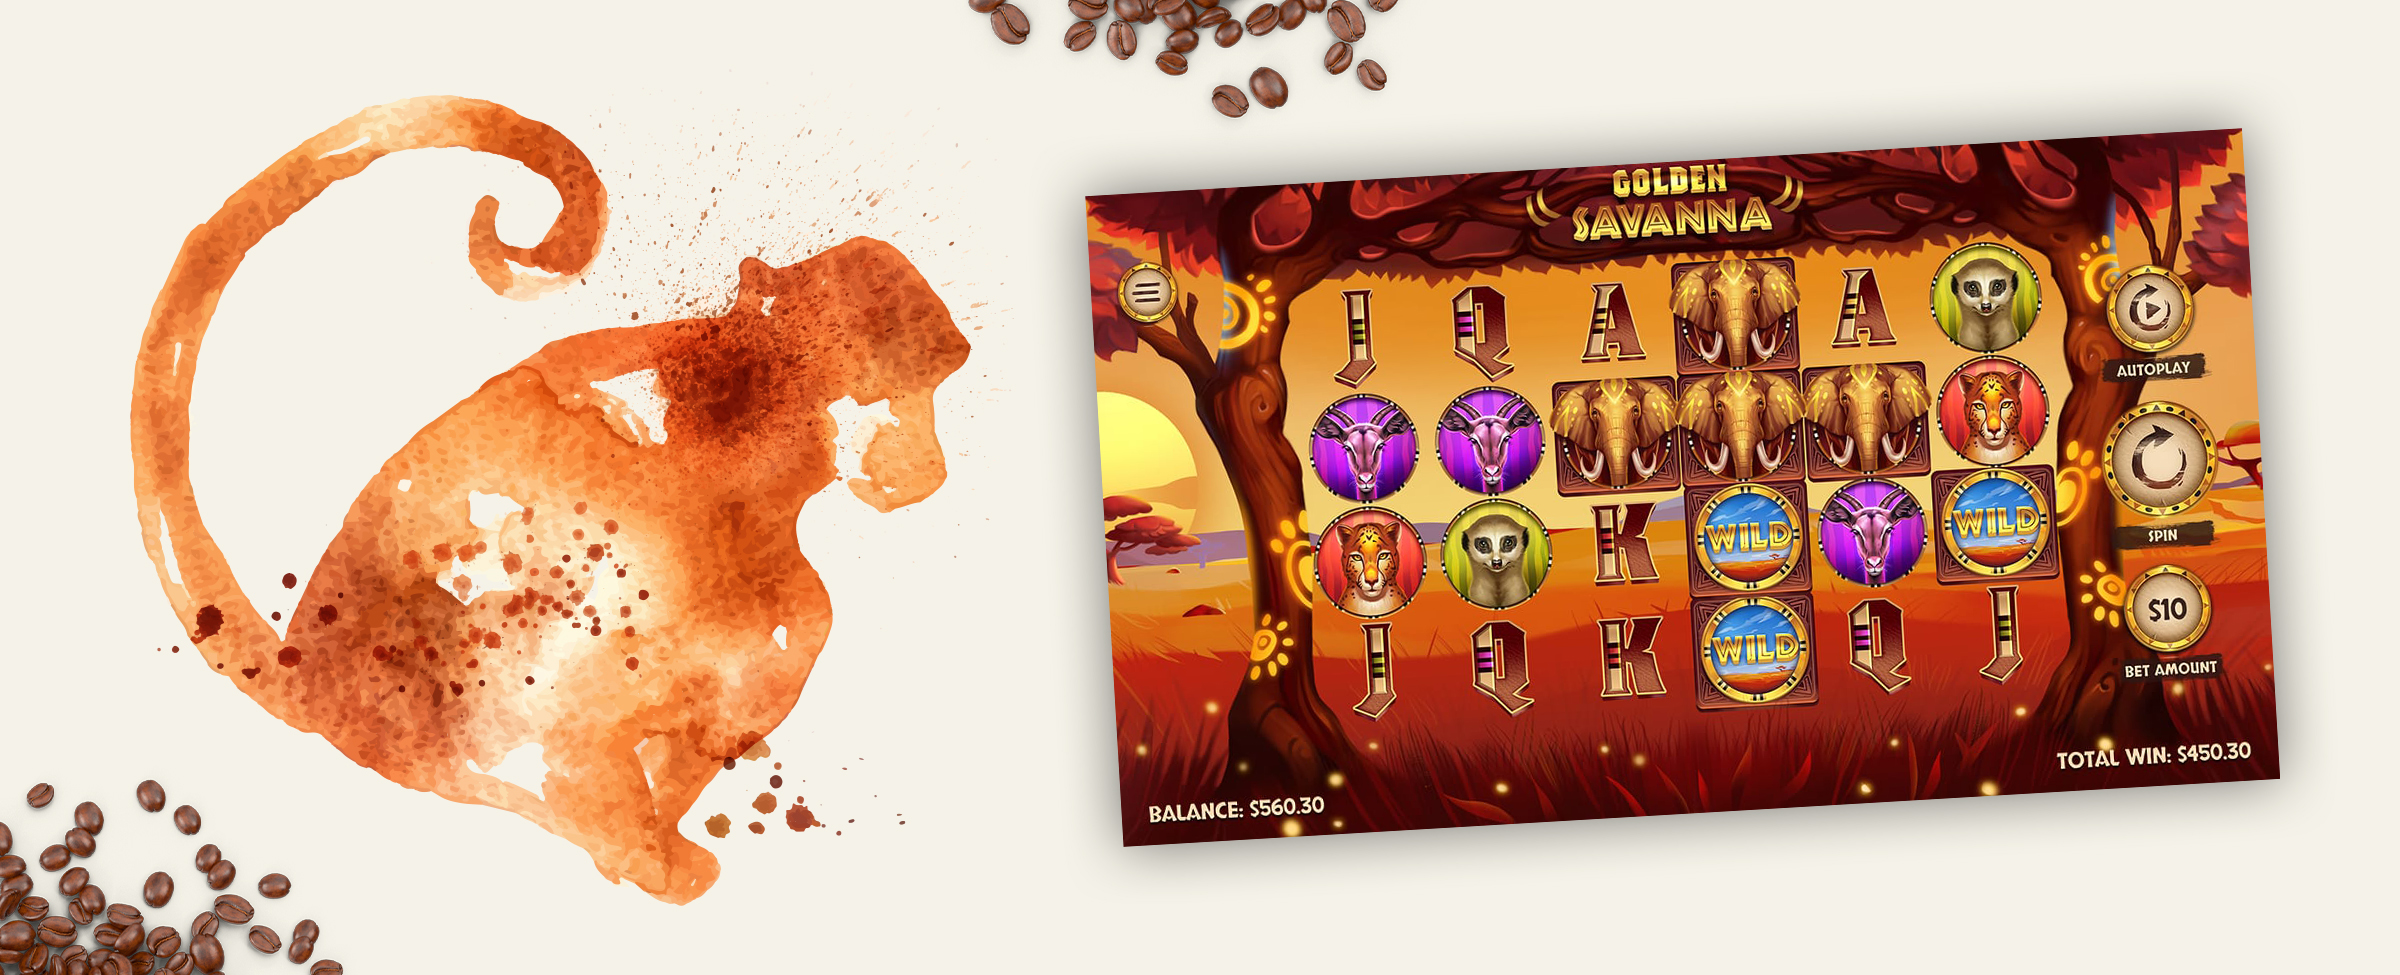 A coffee spill in the shape of a wild monkey on a white table surface is seen to the left of the image, while to its right, a screenshot from the Cafe Casino slot game, Golden Savanna Hot Drop Jackpots, sits atop the table, depicting the savanna desert with game icons and landscape illustrations.